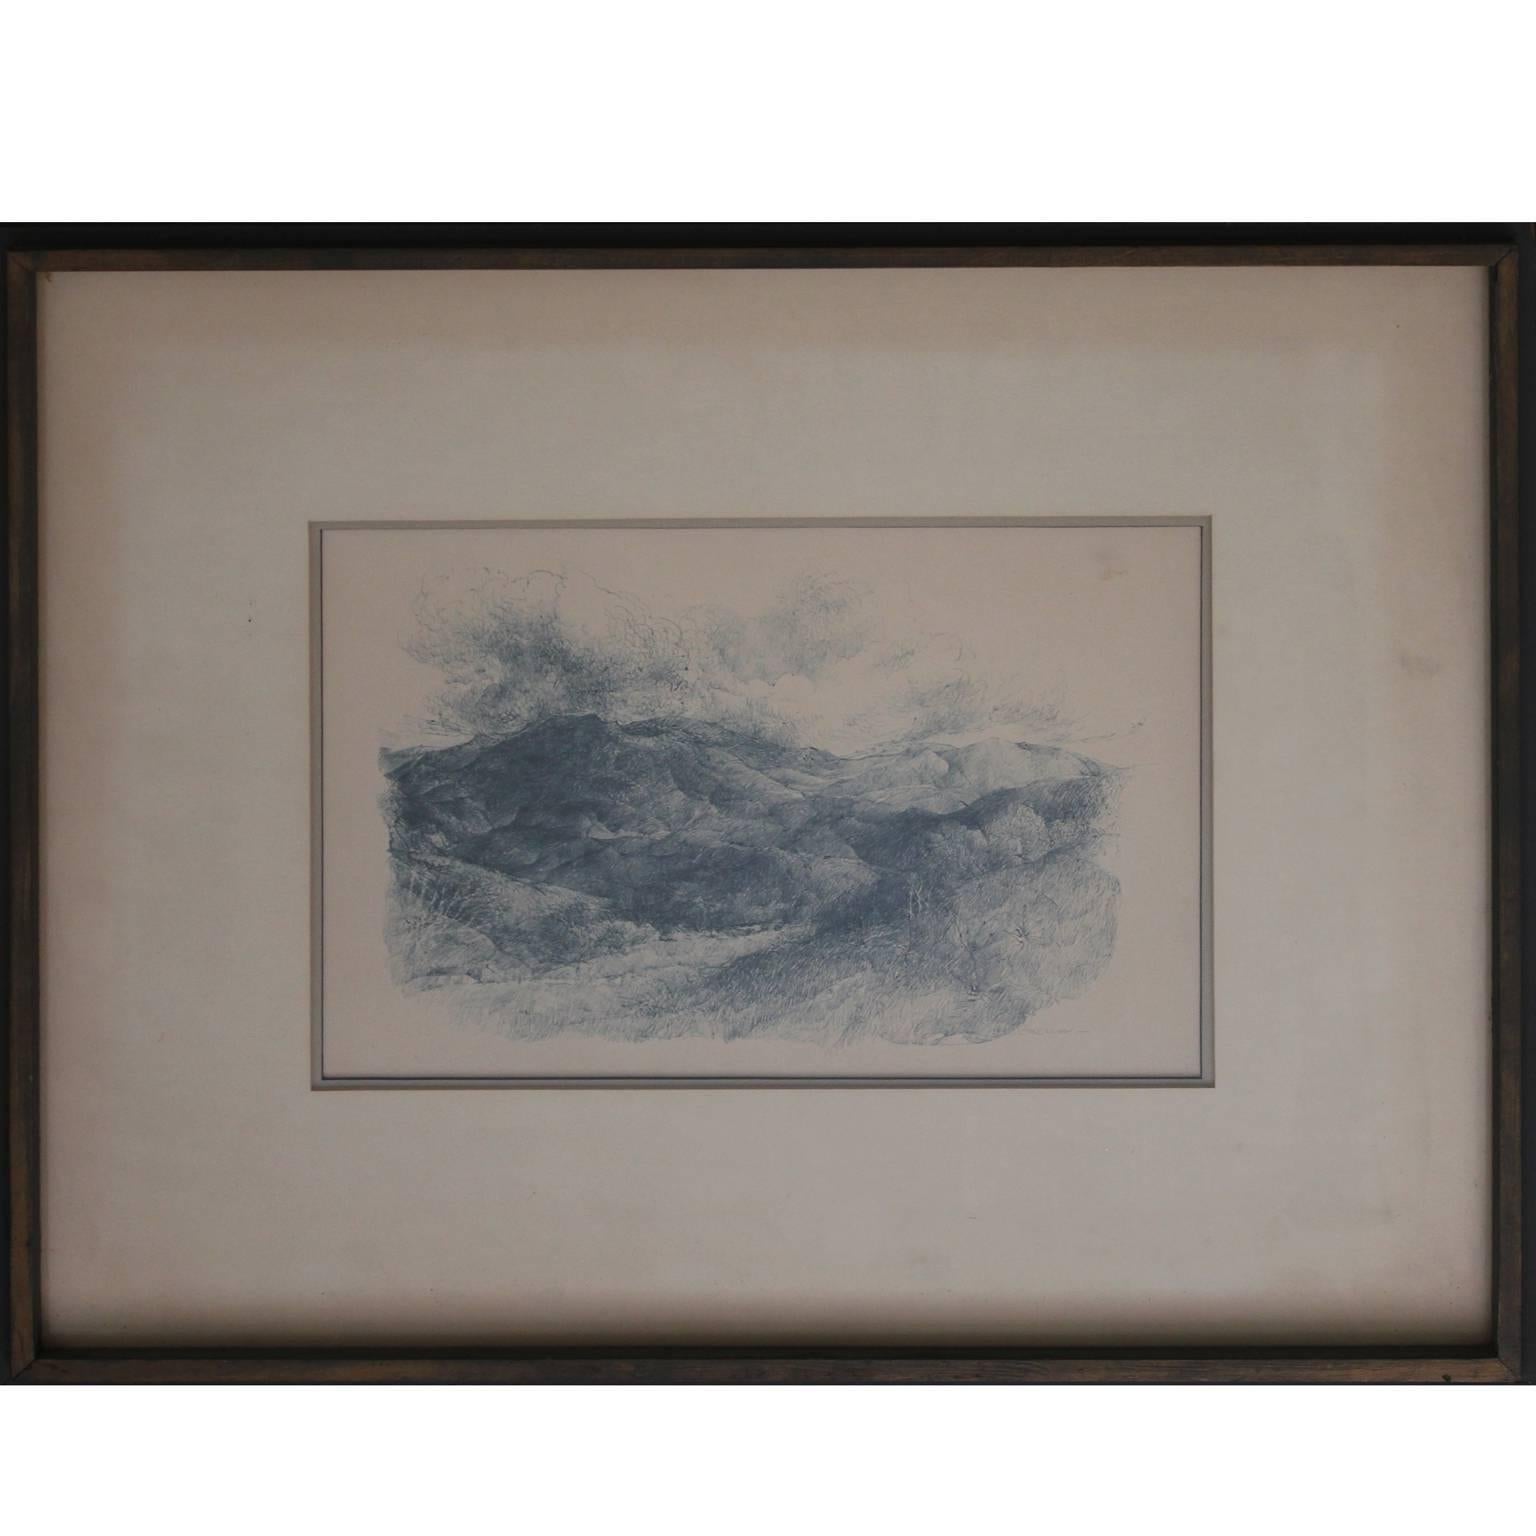 "Mexican Landscape" Early Landscape Drawing